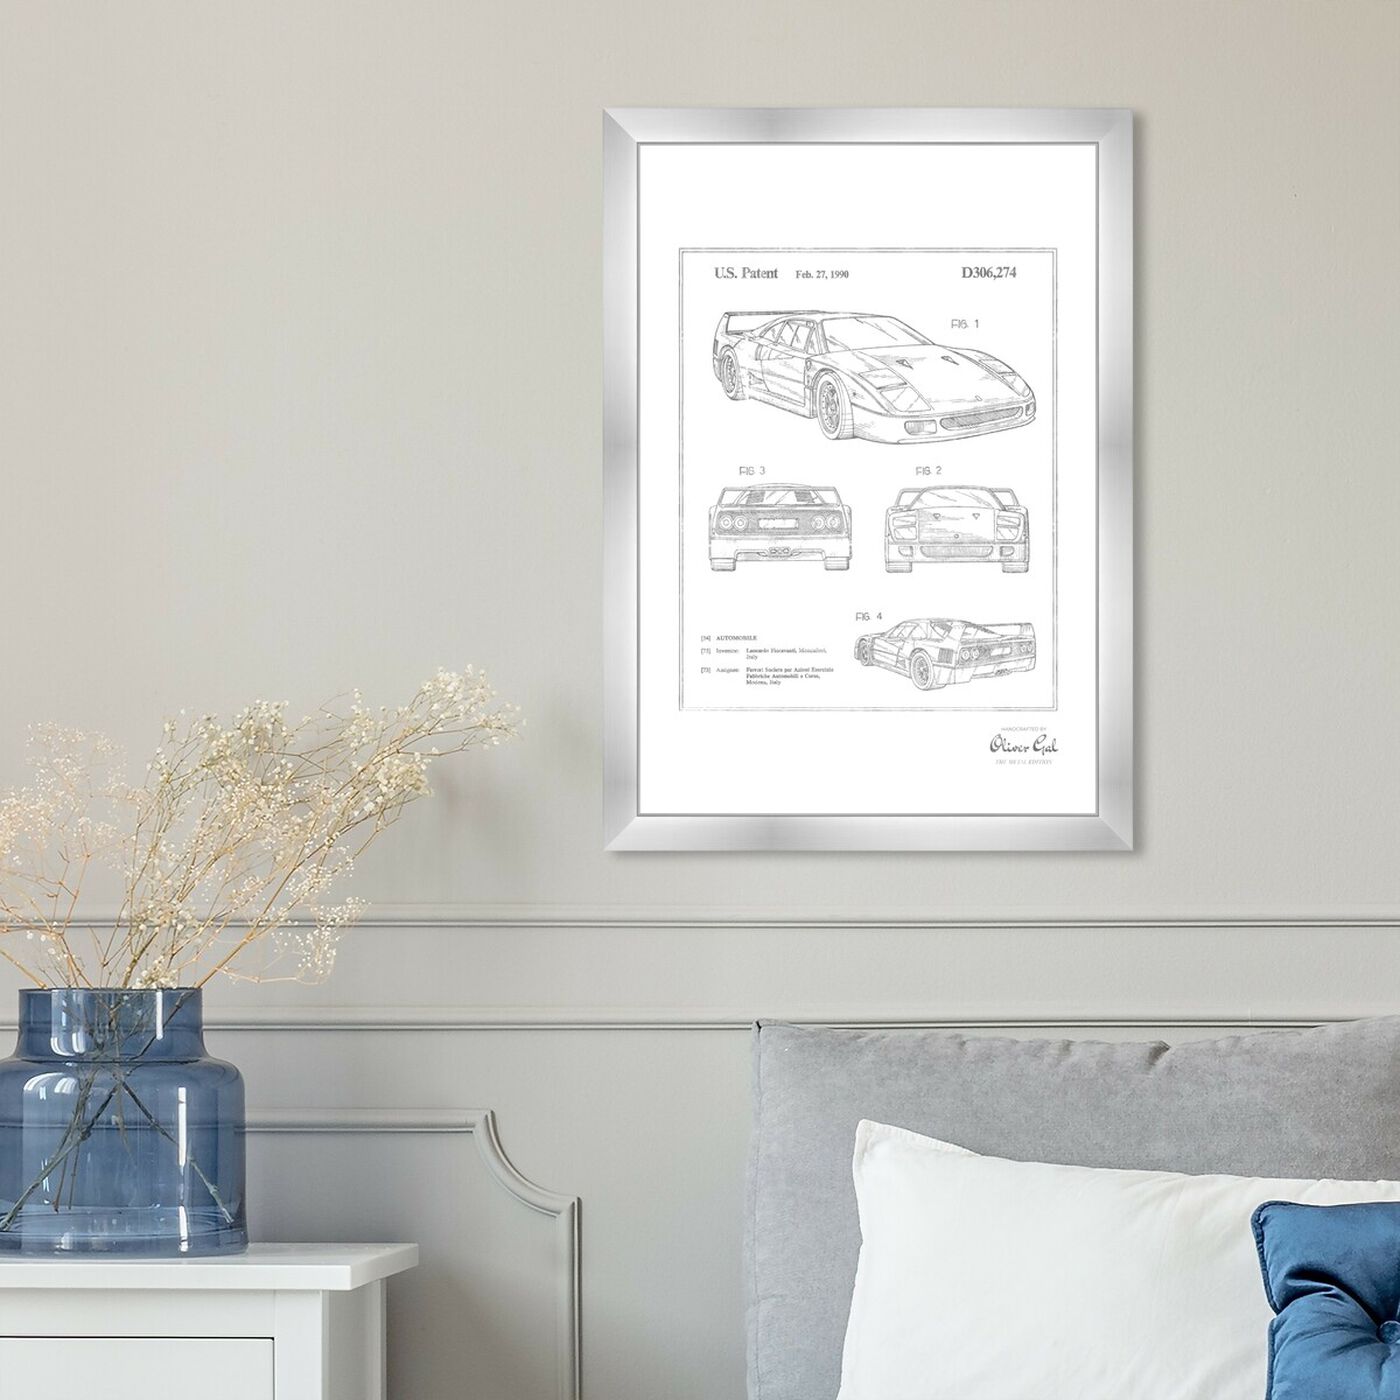 Hanging view of Ferrari F40 1990, Silver Foil featuring transportation and automobiles art.